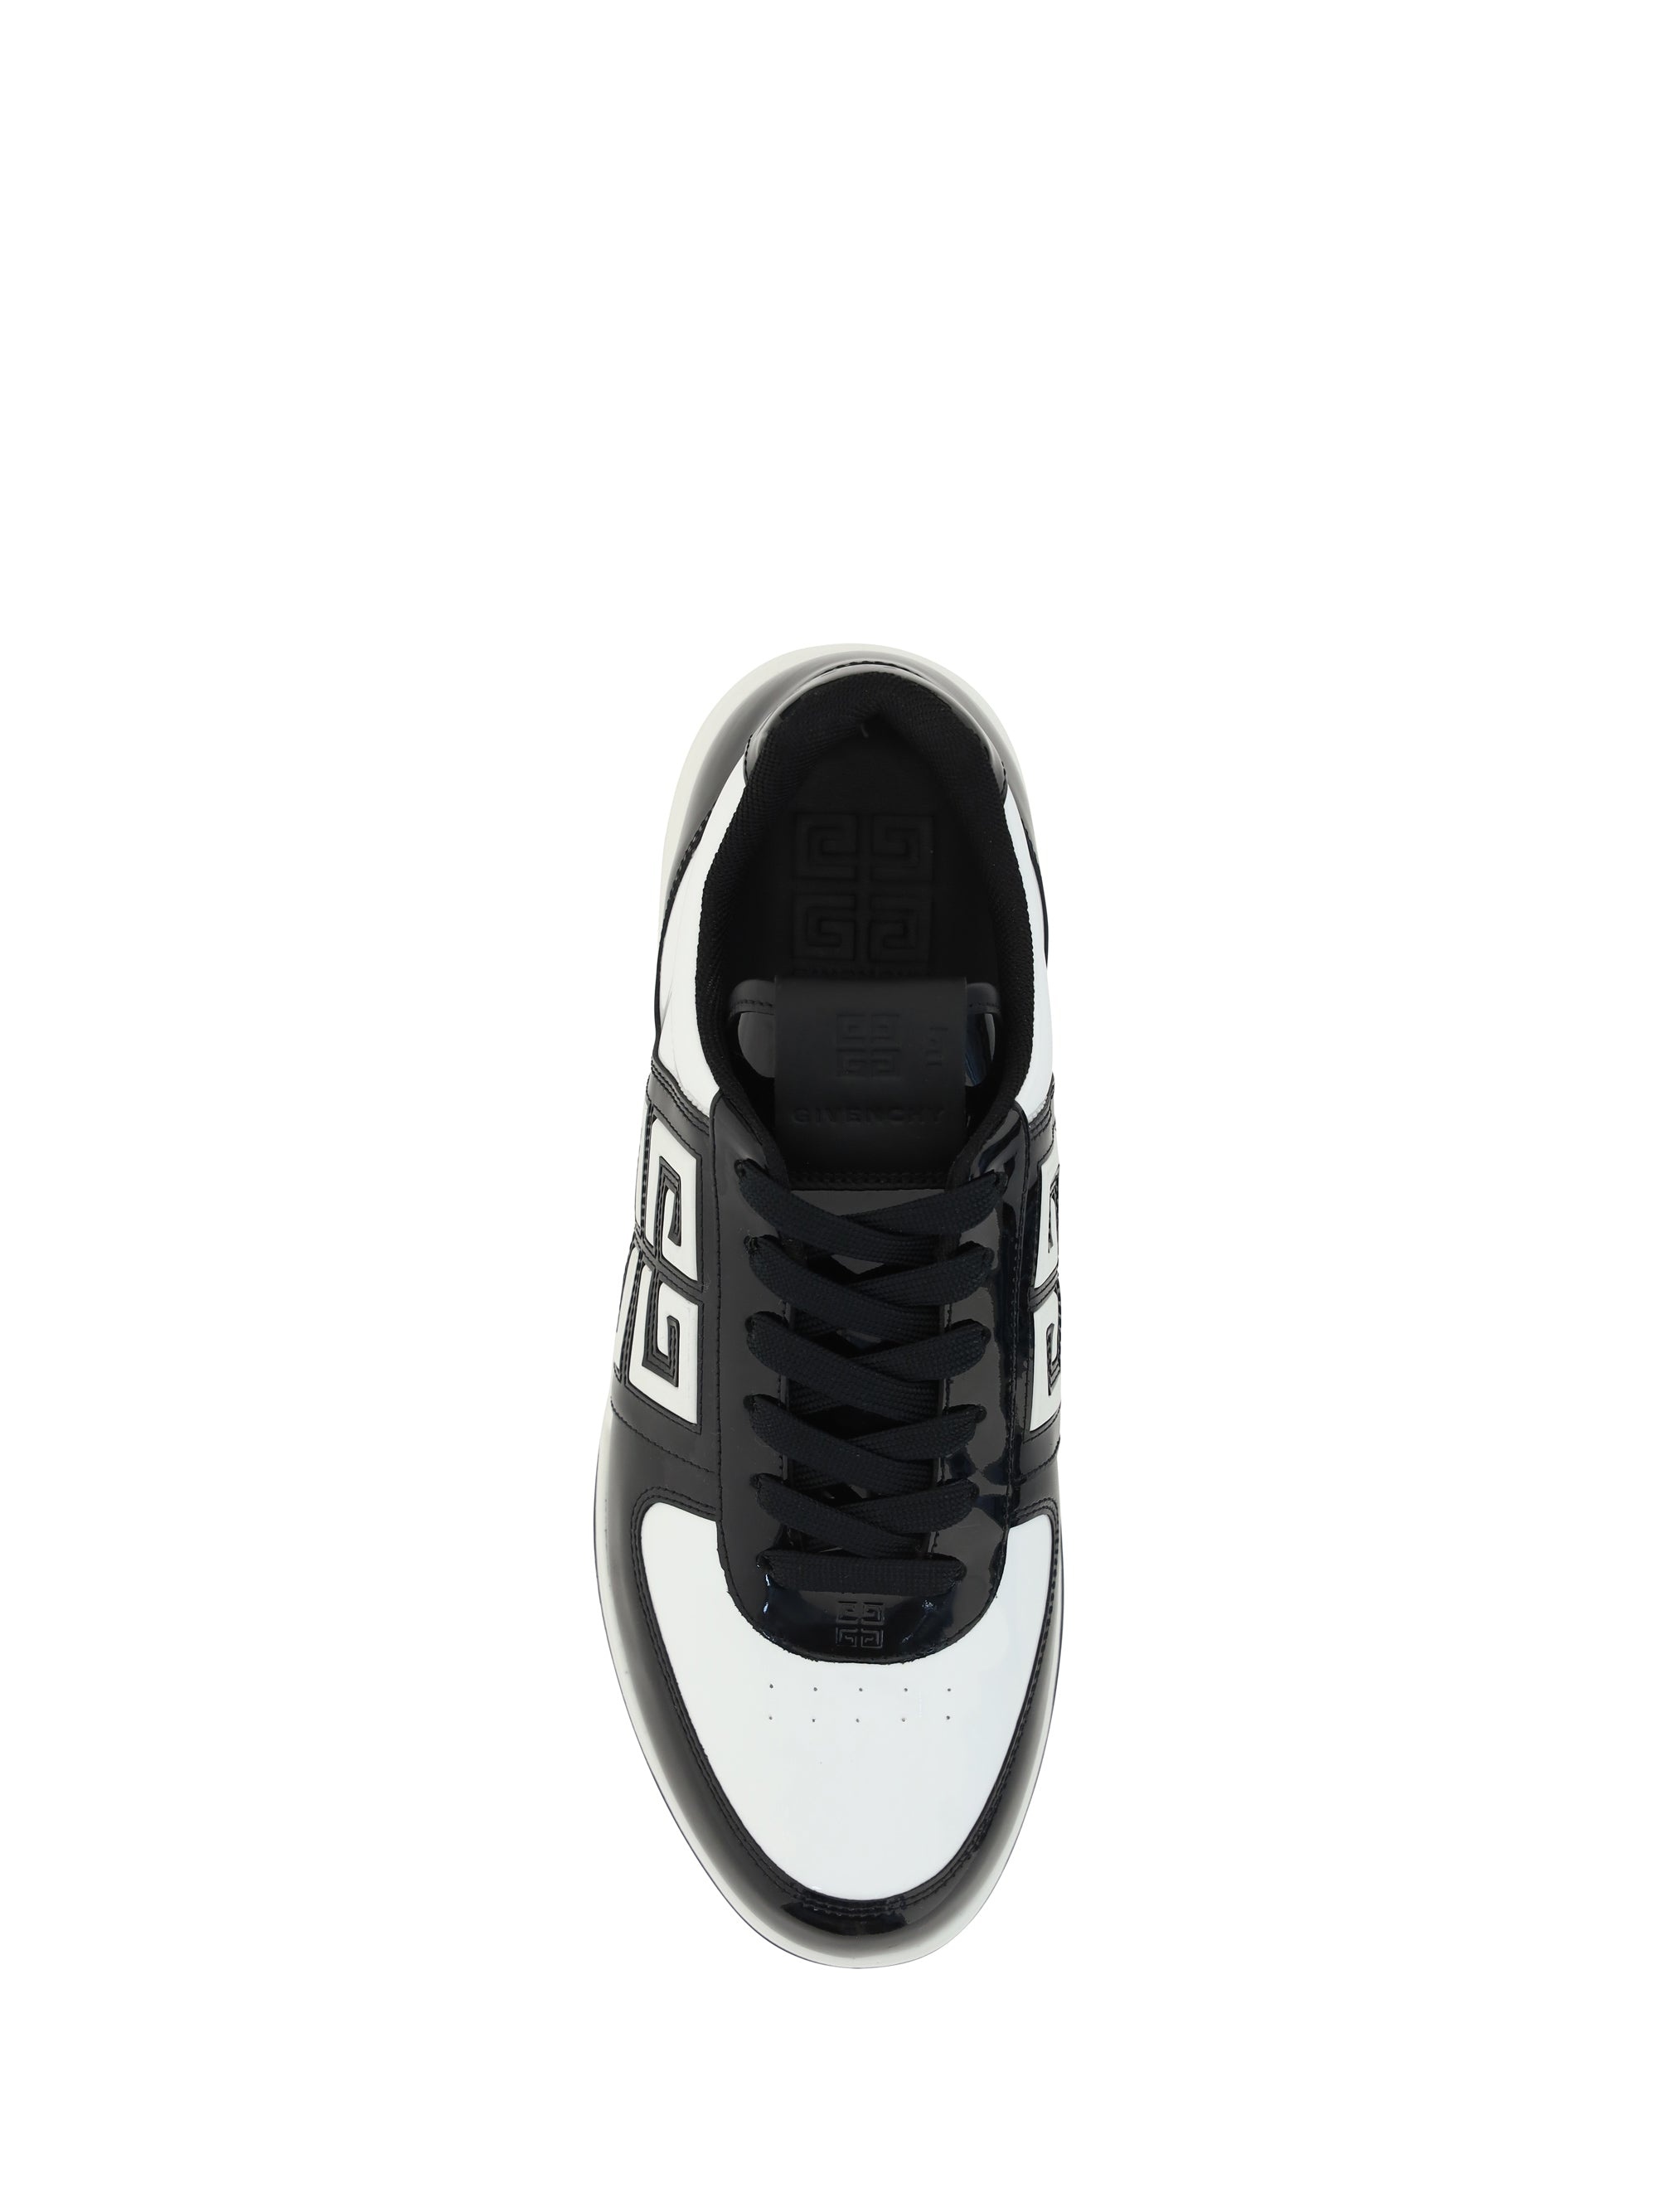 Givenchy Men G4 Low Top Sneakers - 4